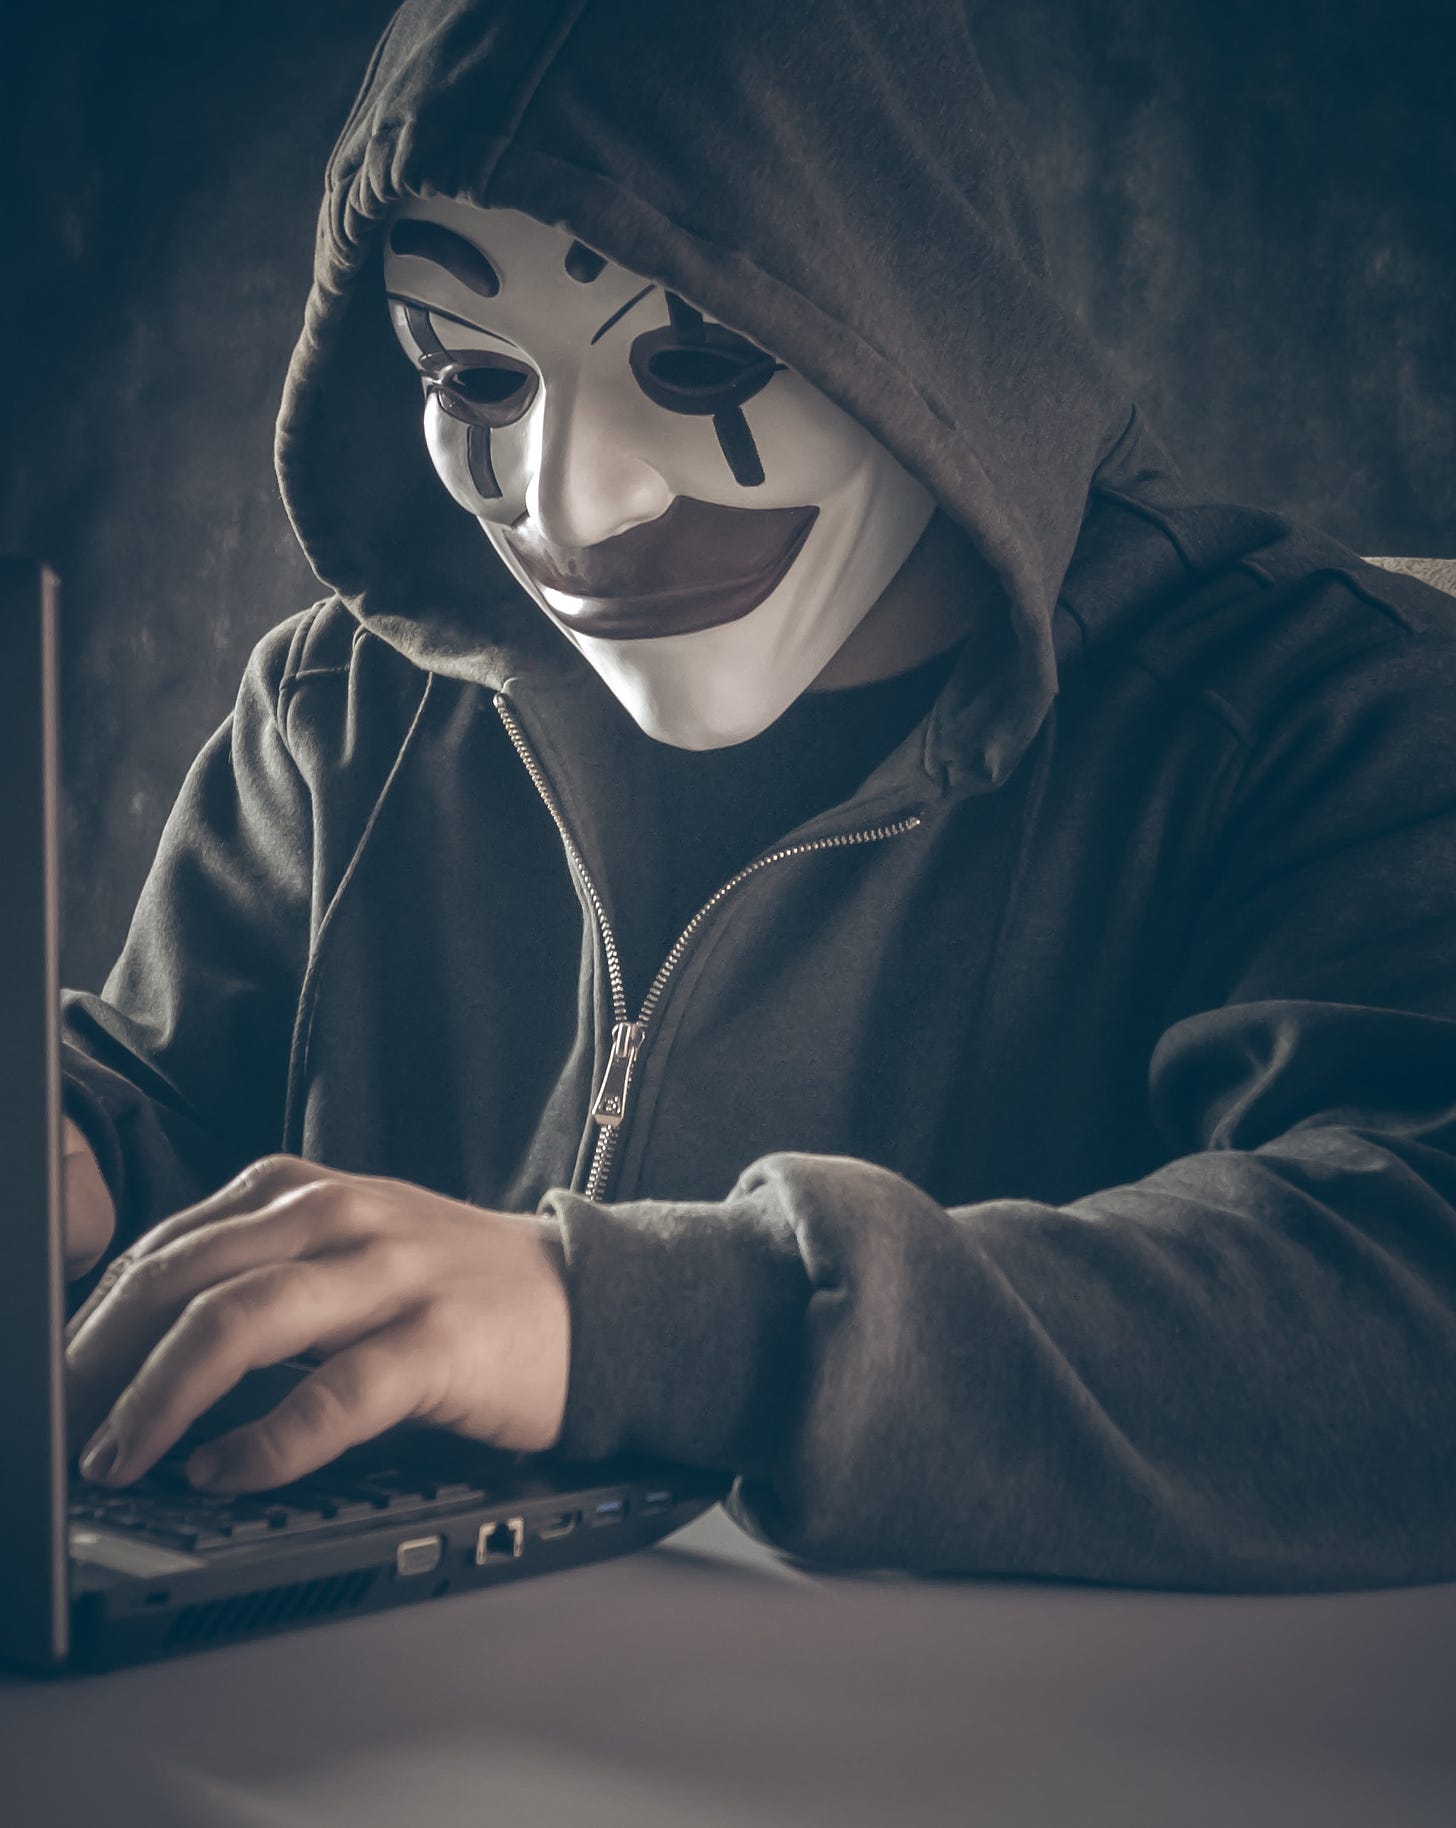 Man in pseudo-Anonymous mask with black hoodie, typing on a computer.